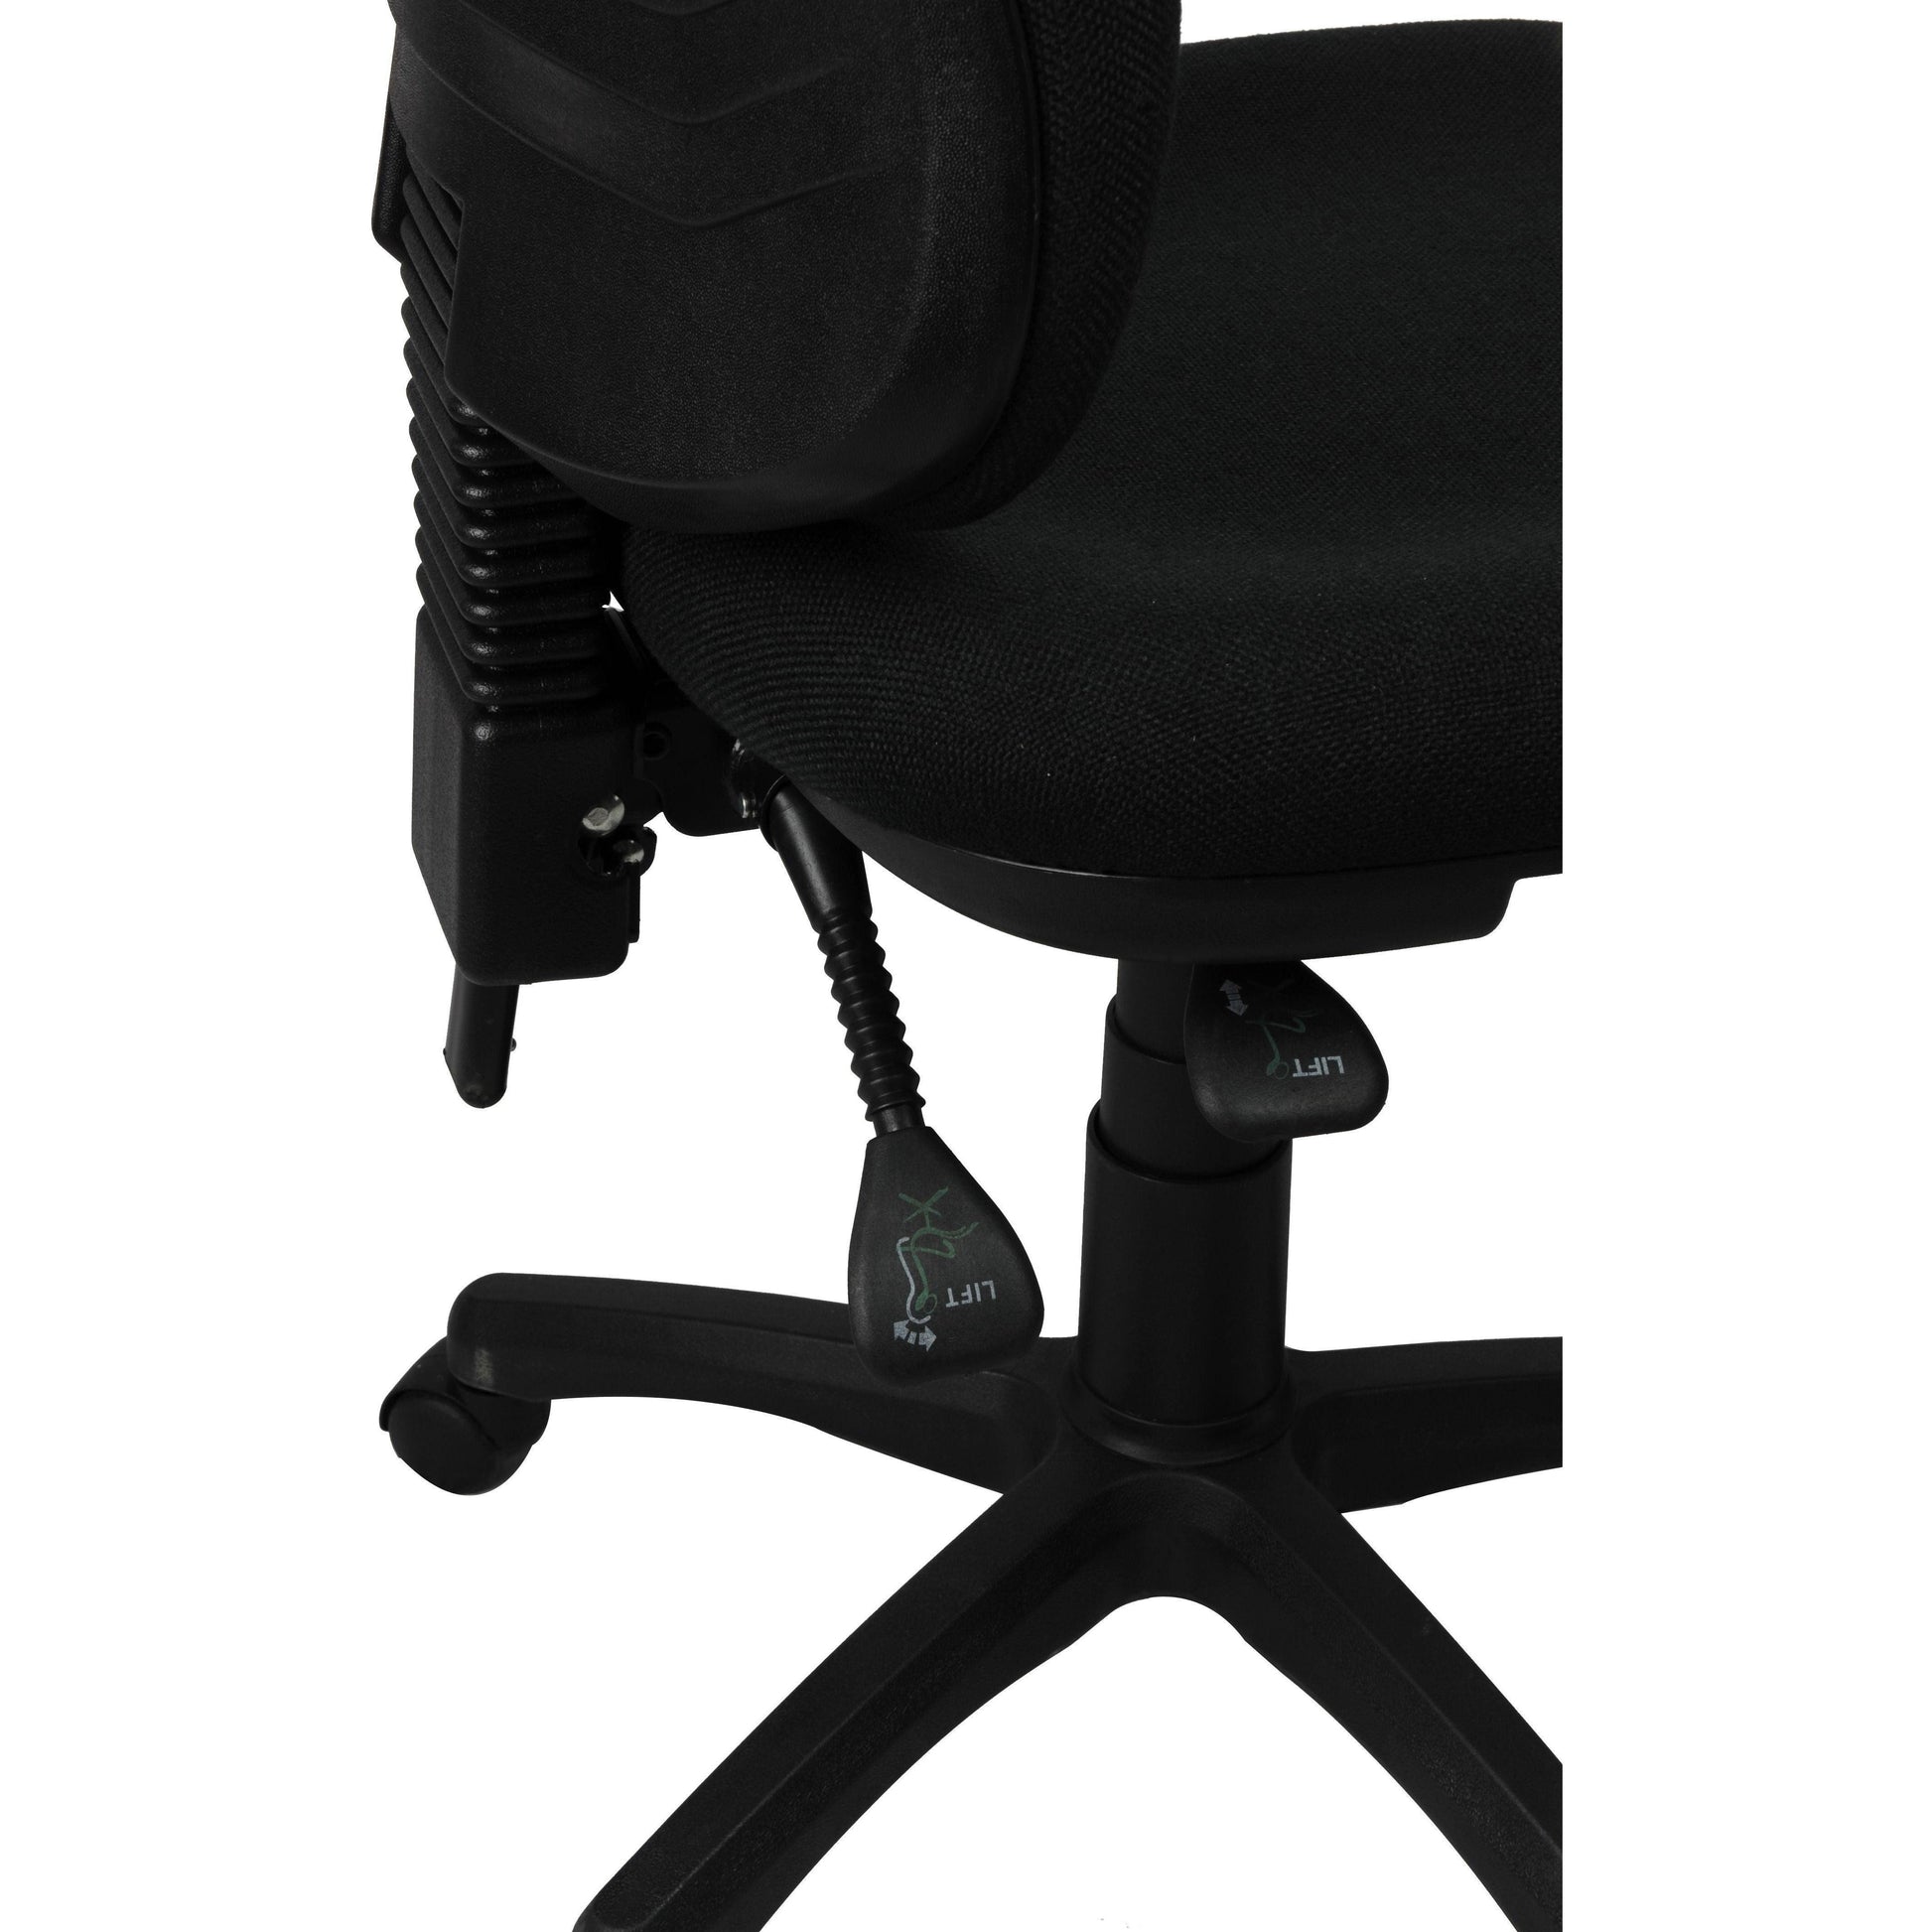 Classic Task Chair - Office Furniture Company 